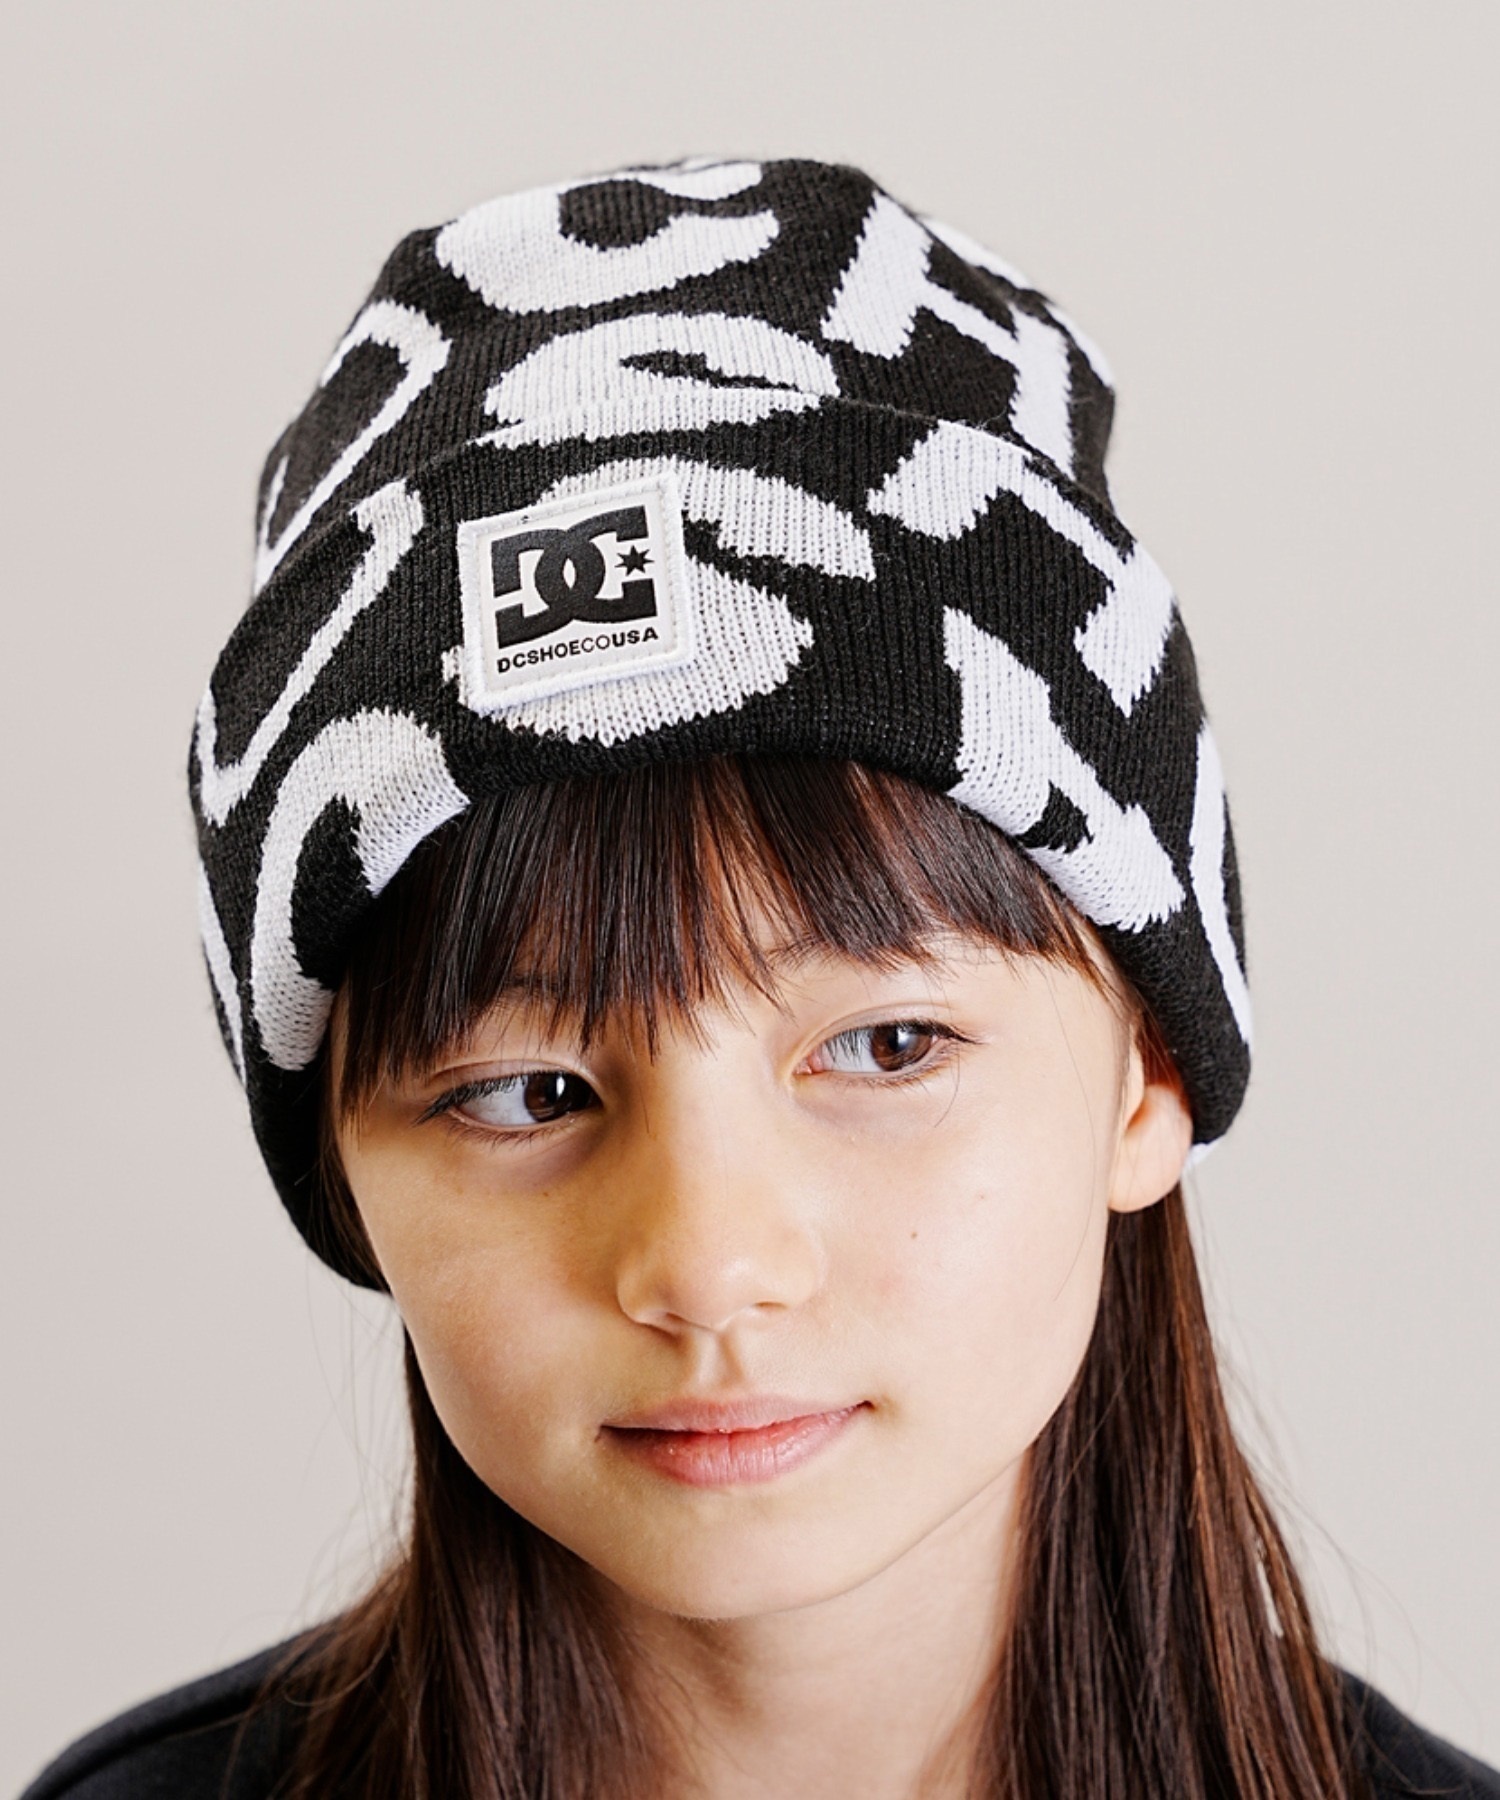 DC/ディーシー 23 KD DOUBLE WATCH LOGO BEANIE キッズ ビーニー ニットキャップ 帽子 YBE234630(BKW-FREE)